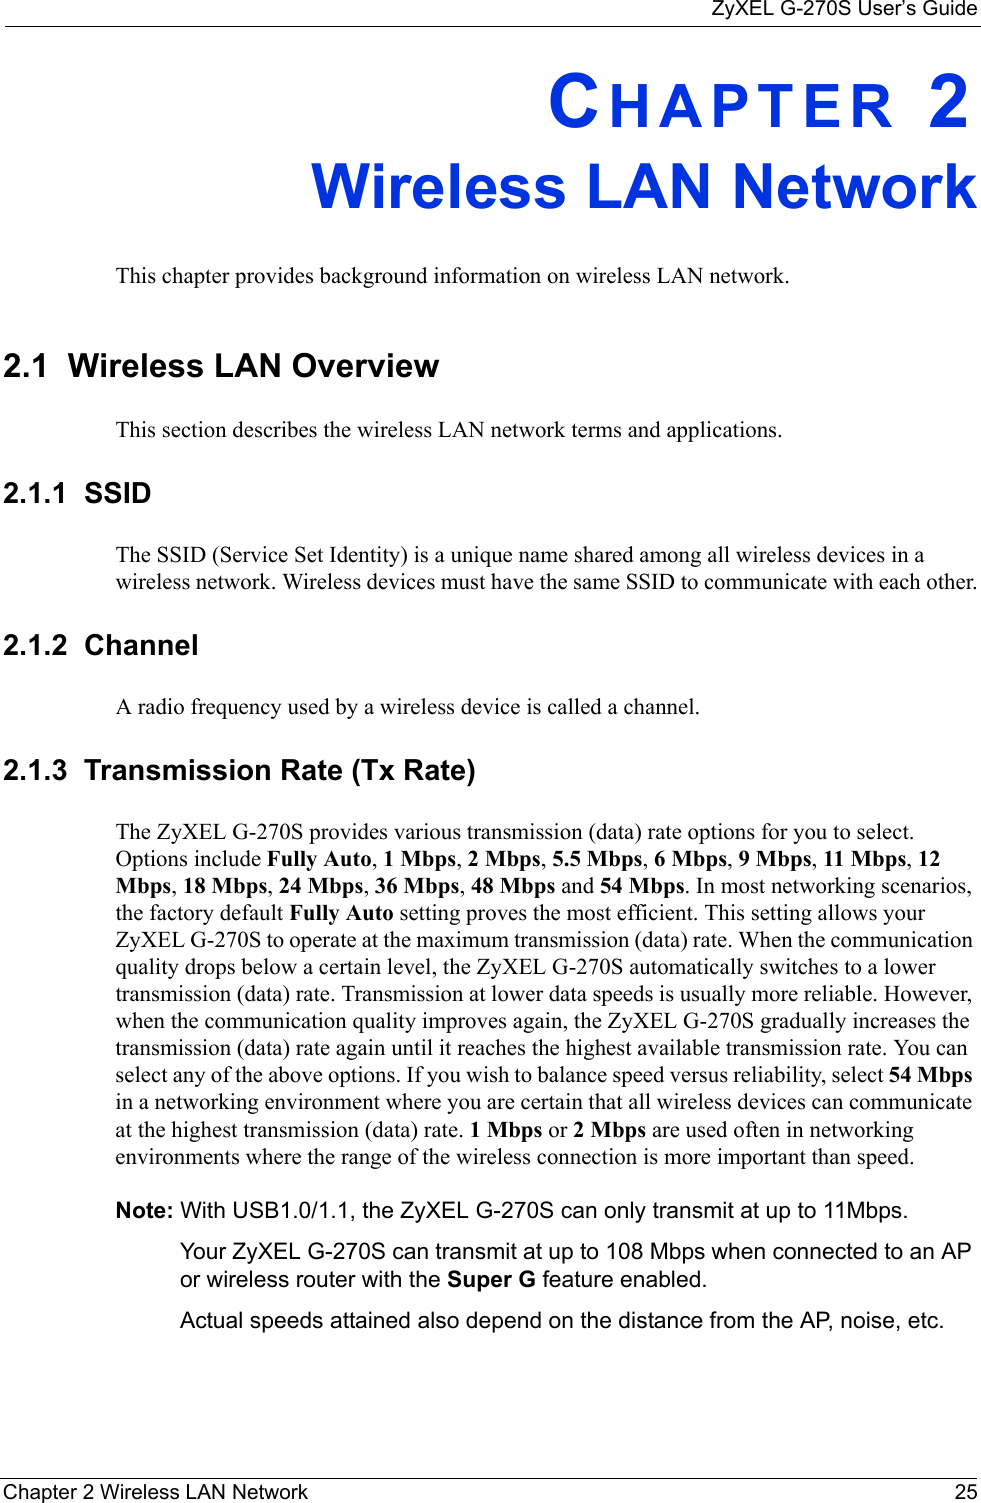 ZyXEL G-270S User’s GuideChapter 2 Wireless LAN Network 25CHAPTER 2Wireless LAN NetworkThis chapter provides background information on wireless LAN network.2.1  Wireless LAN Overview This section describes the wireless LAN network terms and applications.2.1.1  SSIDThe SSID (Service Set Identity) is a unique name shared among all wireless devices in a wireless network. Wireless devices must have the same SSID to communicate with each other.2.1.2  ChannelA radio frequency used by a wireless device is called a channel.2.1.3  Transmission Rate (Tx Rate)The ZyXEL G-270S provides various transmission (data) rate options for you to select. Options include Fully Auto, 1 Mbps, 2 Mbps, 5.5 Mbps, 6 Mbps, 9 Mbps, 11 Mbps, 12 Mbps, 18 Mbps, 24 Mbps, 36 Mbps, 48 Mbps and 54 Mbps. In most networking scenarios, the factory default Fully Auto setting proves the most efficient. This setting allows your ZyXEL G-270S to operate at the maximum transmission (data) rate. When the communication quality drops below a certain level, the ZyXEL G-270S automatically switches to a lower transmission (data) rate. Transmission at lower data speeds is usually more reliable. However, when the communication quality improves again, the ZyXEL G-270S gradually increases the transmission (data) rate again until it reaches the highest available transmission rate. You can select any of the above options. If you wish to balance speed versus reliability, select 54 Mbps in a networking environment where you are certain that all wireless devices can communicate at the highest transmission (data) rate. 1 Mbps or 2 Mbps are used often in networking environments where the range of the wireless connection is more important than speed. Note: With USB1.0/1.1, the ZyXEL G-270S can only transmit at up to 11Mbps.Your ZyXEL G-270S can transmit at up to 108 Mbps when connected to an AP or wireless router with the Super G feature enabled. Actual speeds attained also depend on the distance from the AP, noise, etc.